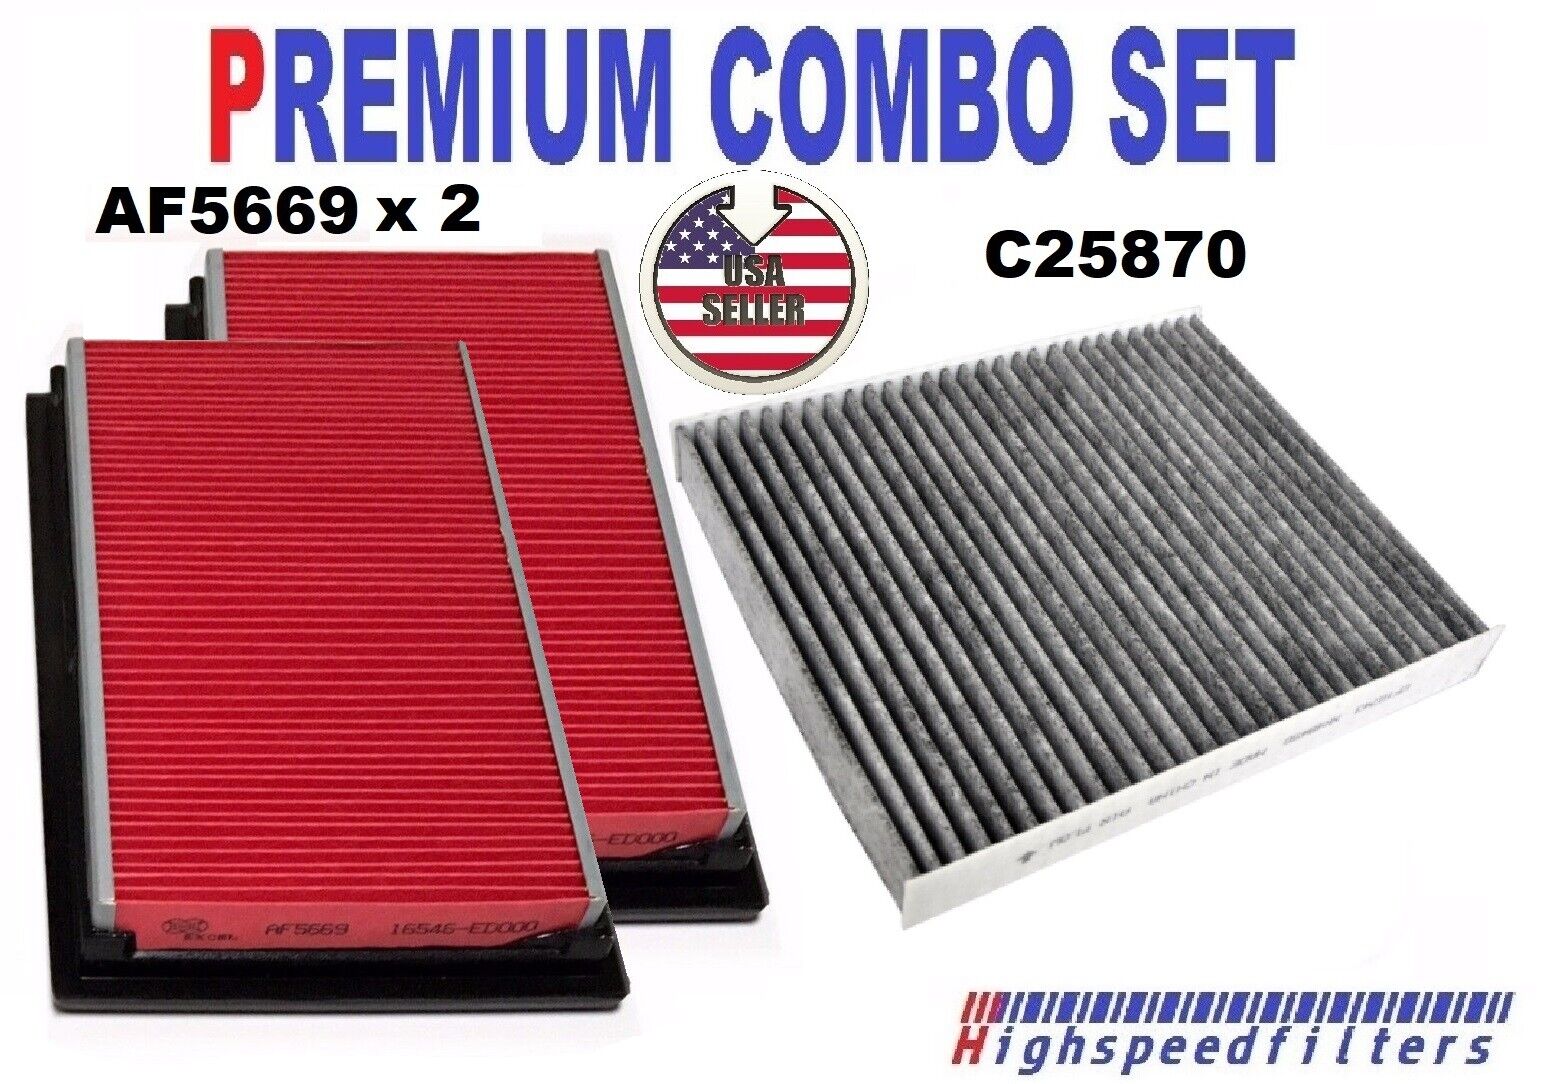 2x Engine Air Filter + CHARCOAL Cabin Air Filter for 2014 - 2019 INFINITI Q50